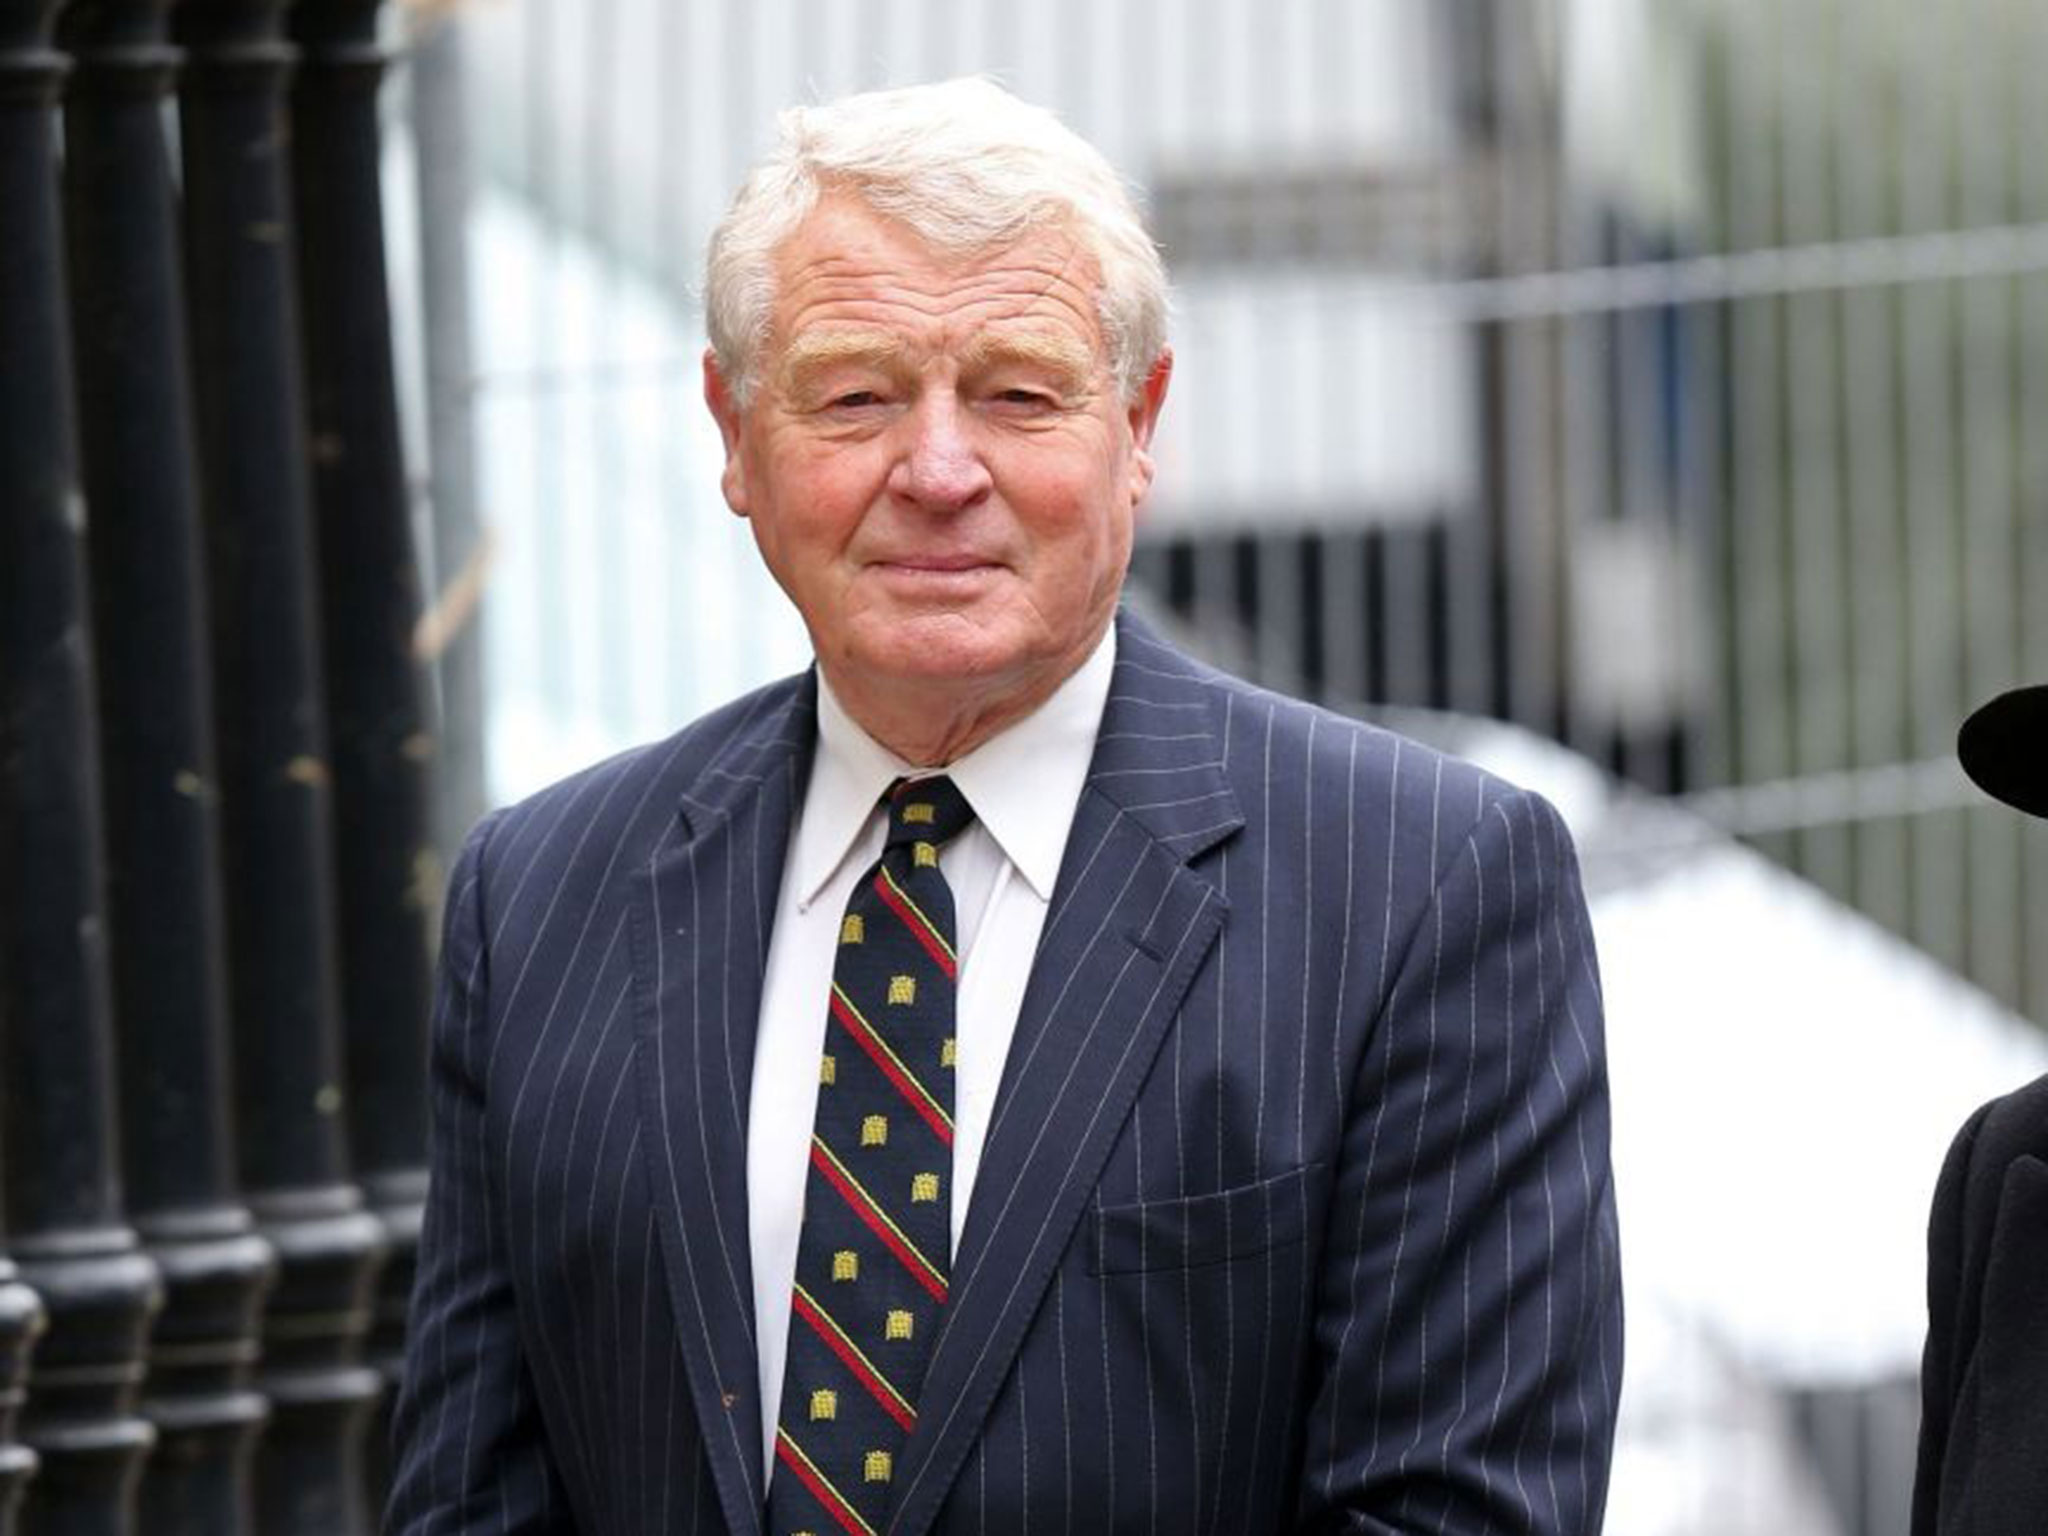 Referring to Nigel Farage's comments this week that he would like to repeal some discrimination legislation, Lord Ashdown, who is co-ordinating the LibDems' general election campaign, said: "If ever we needed a reason to fight, that is it. In the coming c